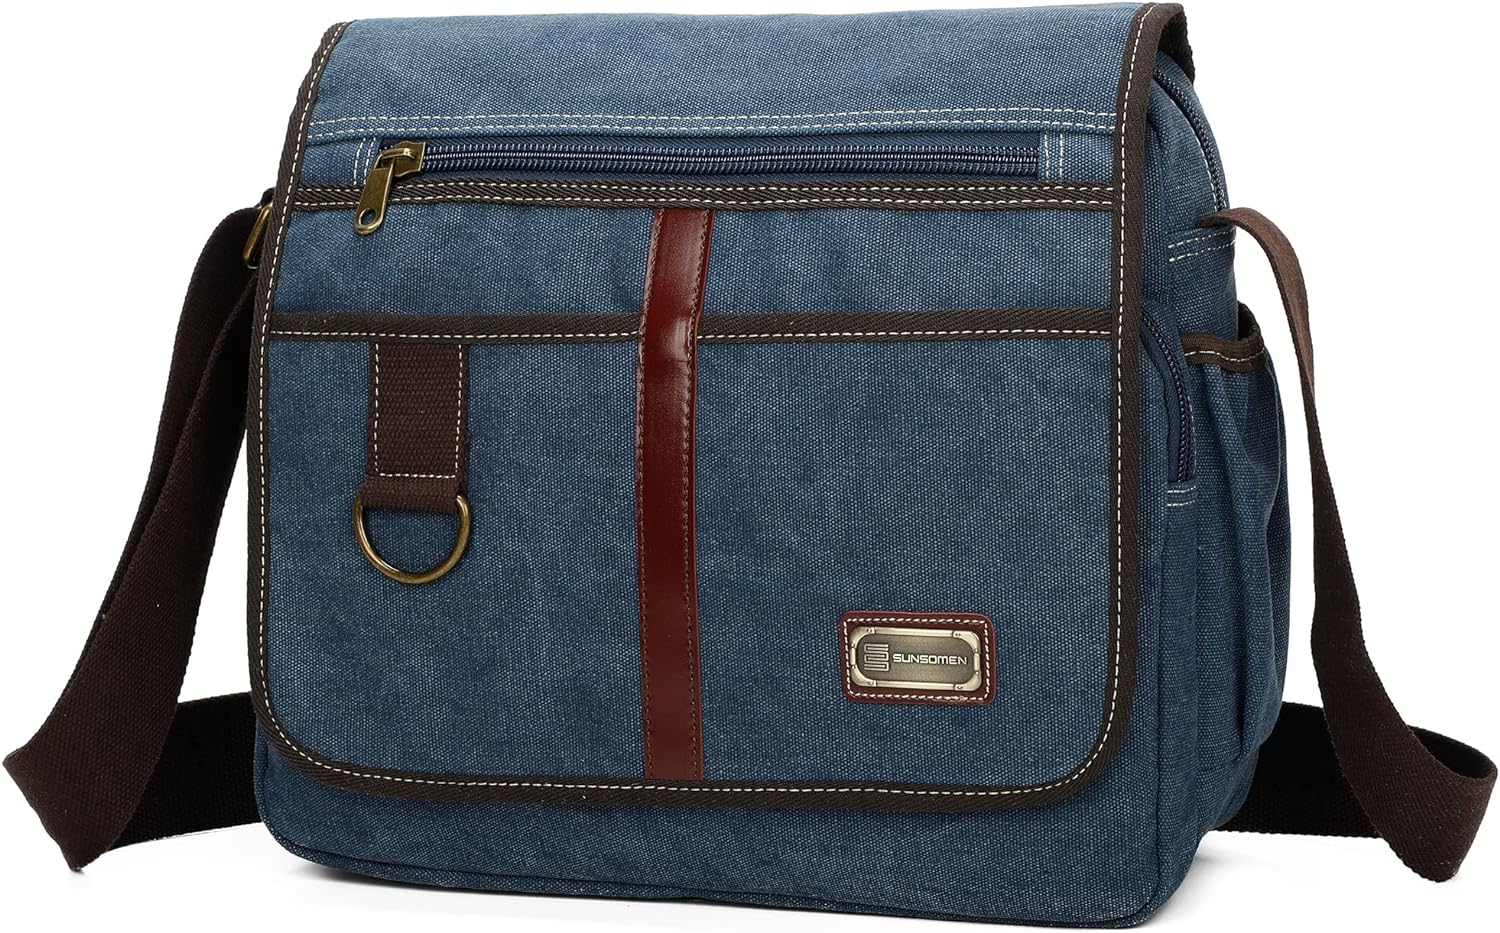 Comparing 5 Canvas Messenger Bags for Men and Women